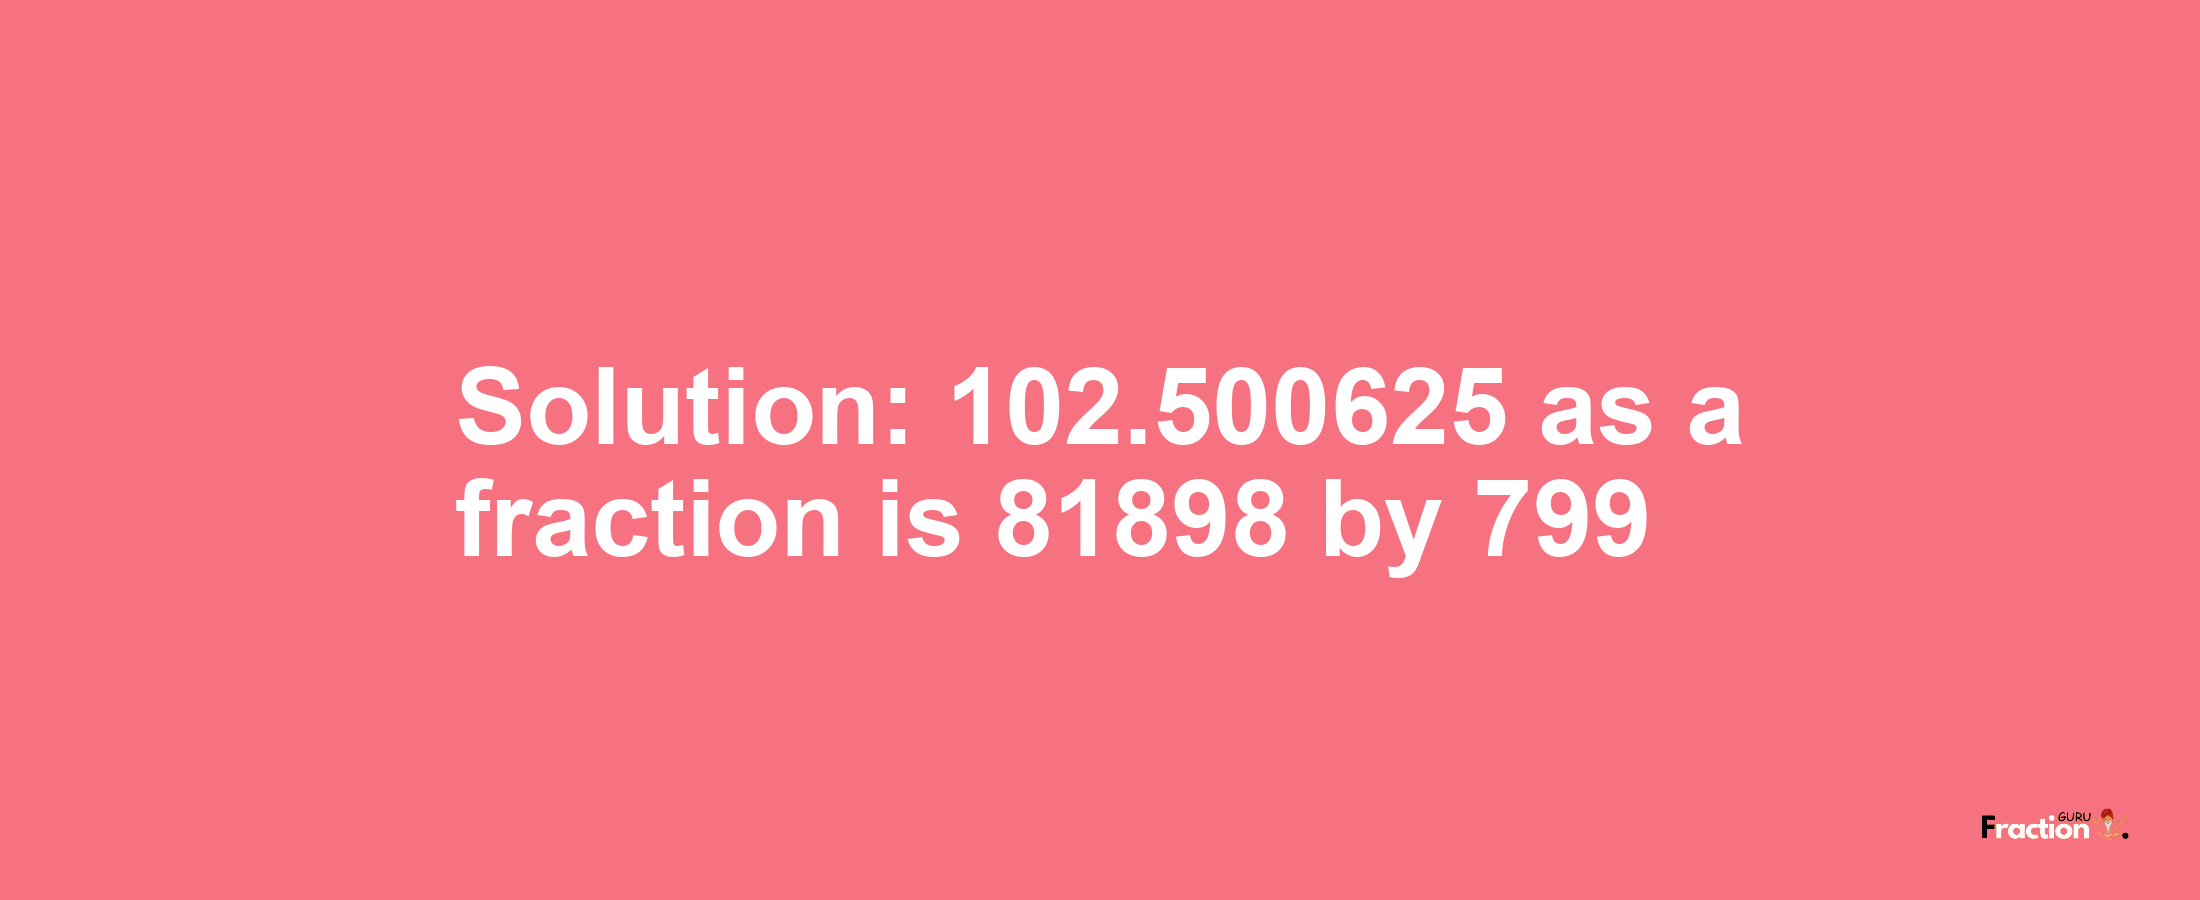 Solution:102.500625 as a fraction is 81898/799